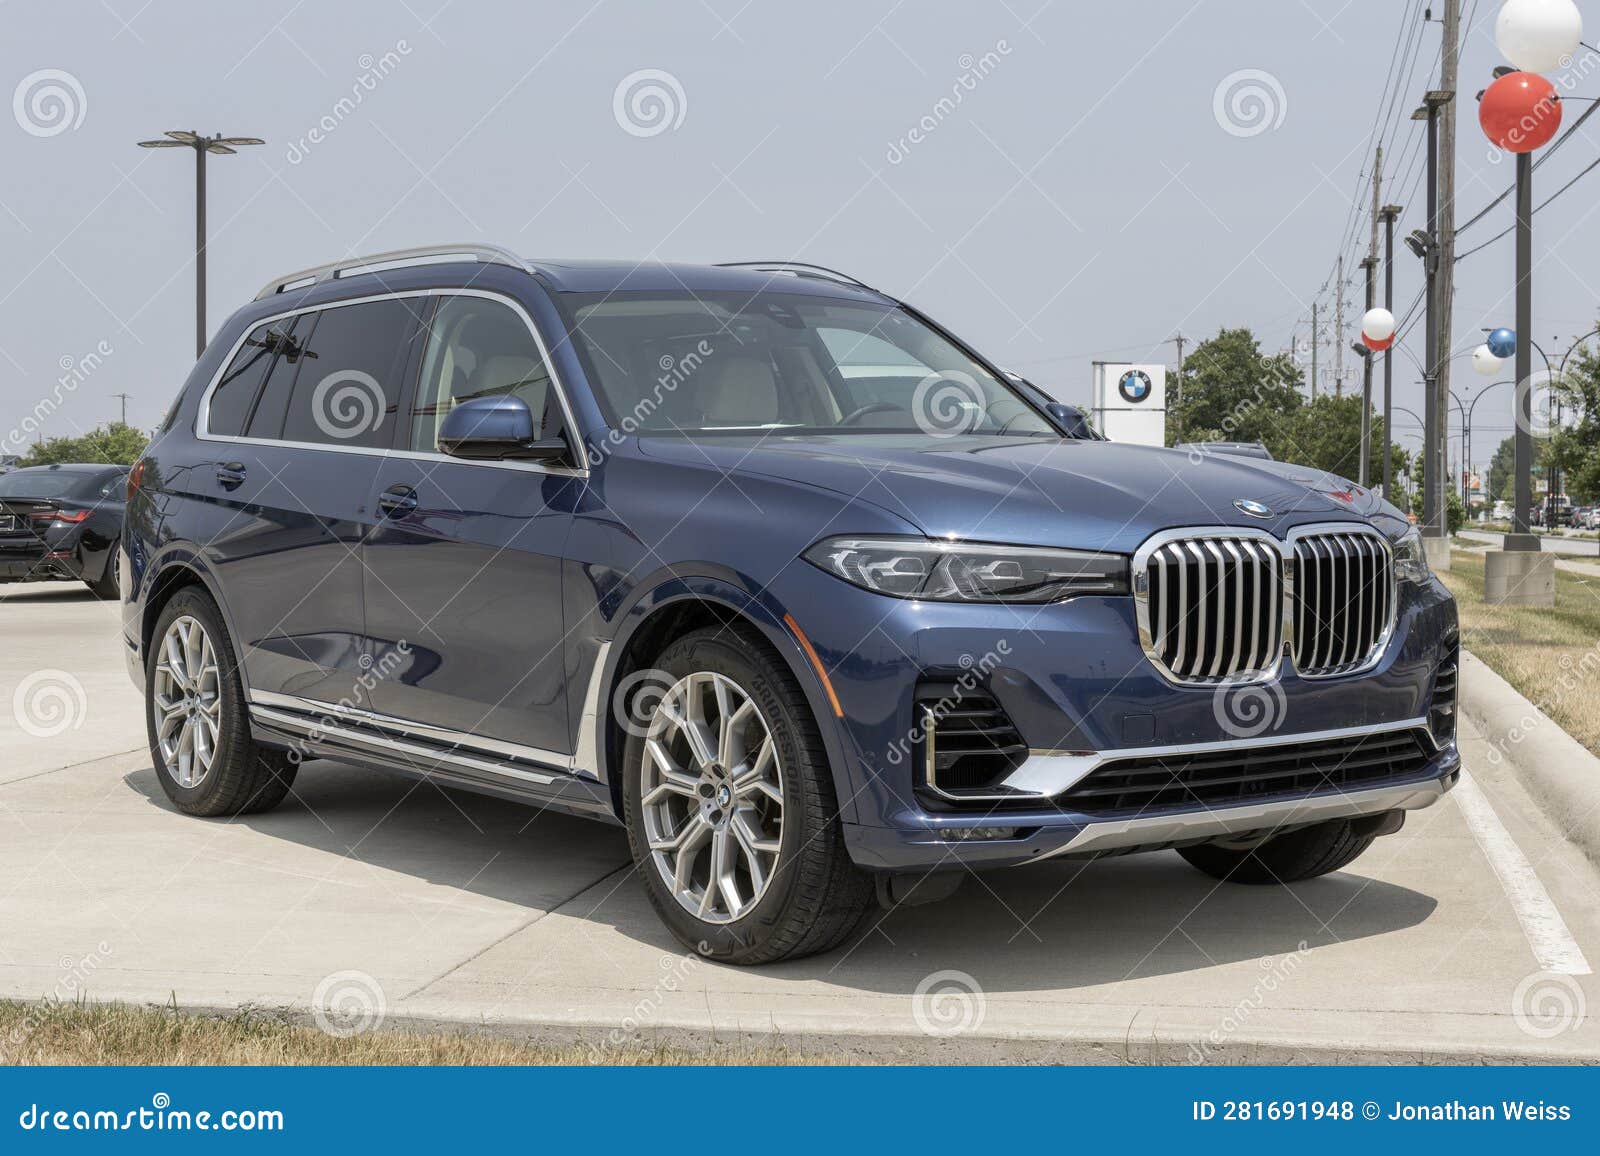 used bmw x7 xdrive40i on display at a dealership. with supply issues, bmw is buying and selling preowned cars to meet demand